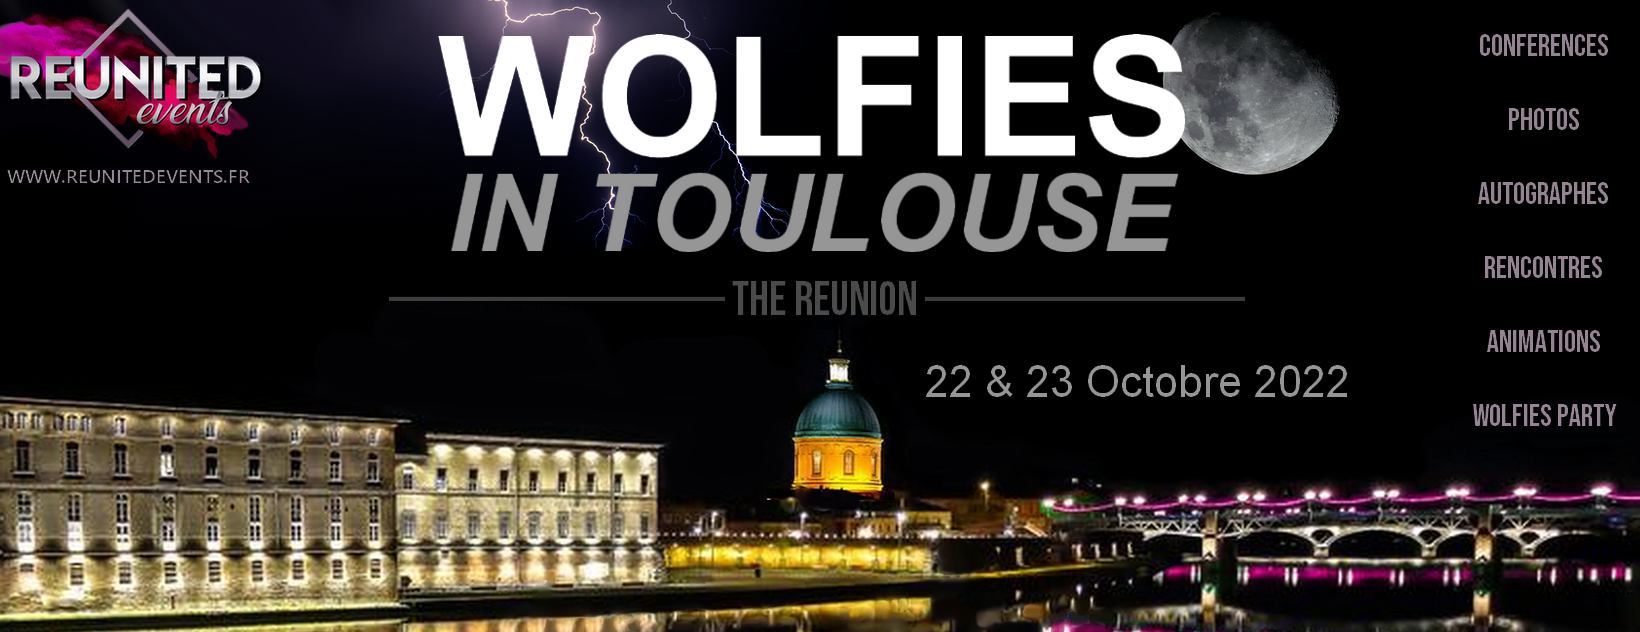 Wolfies in Toulouse – The Reunion